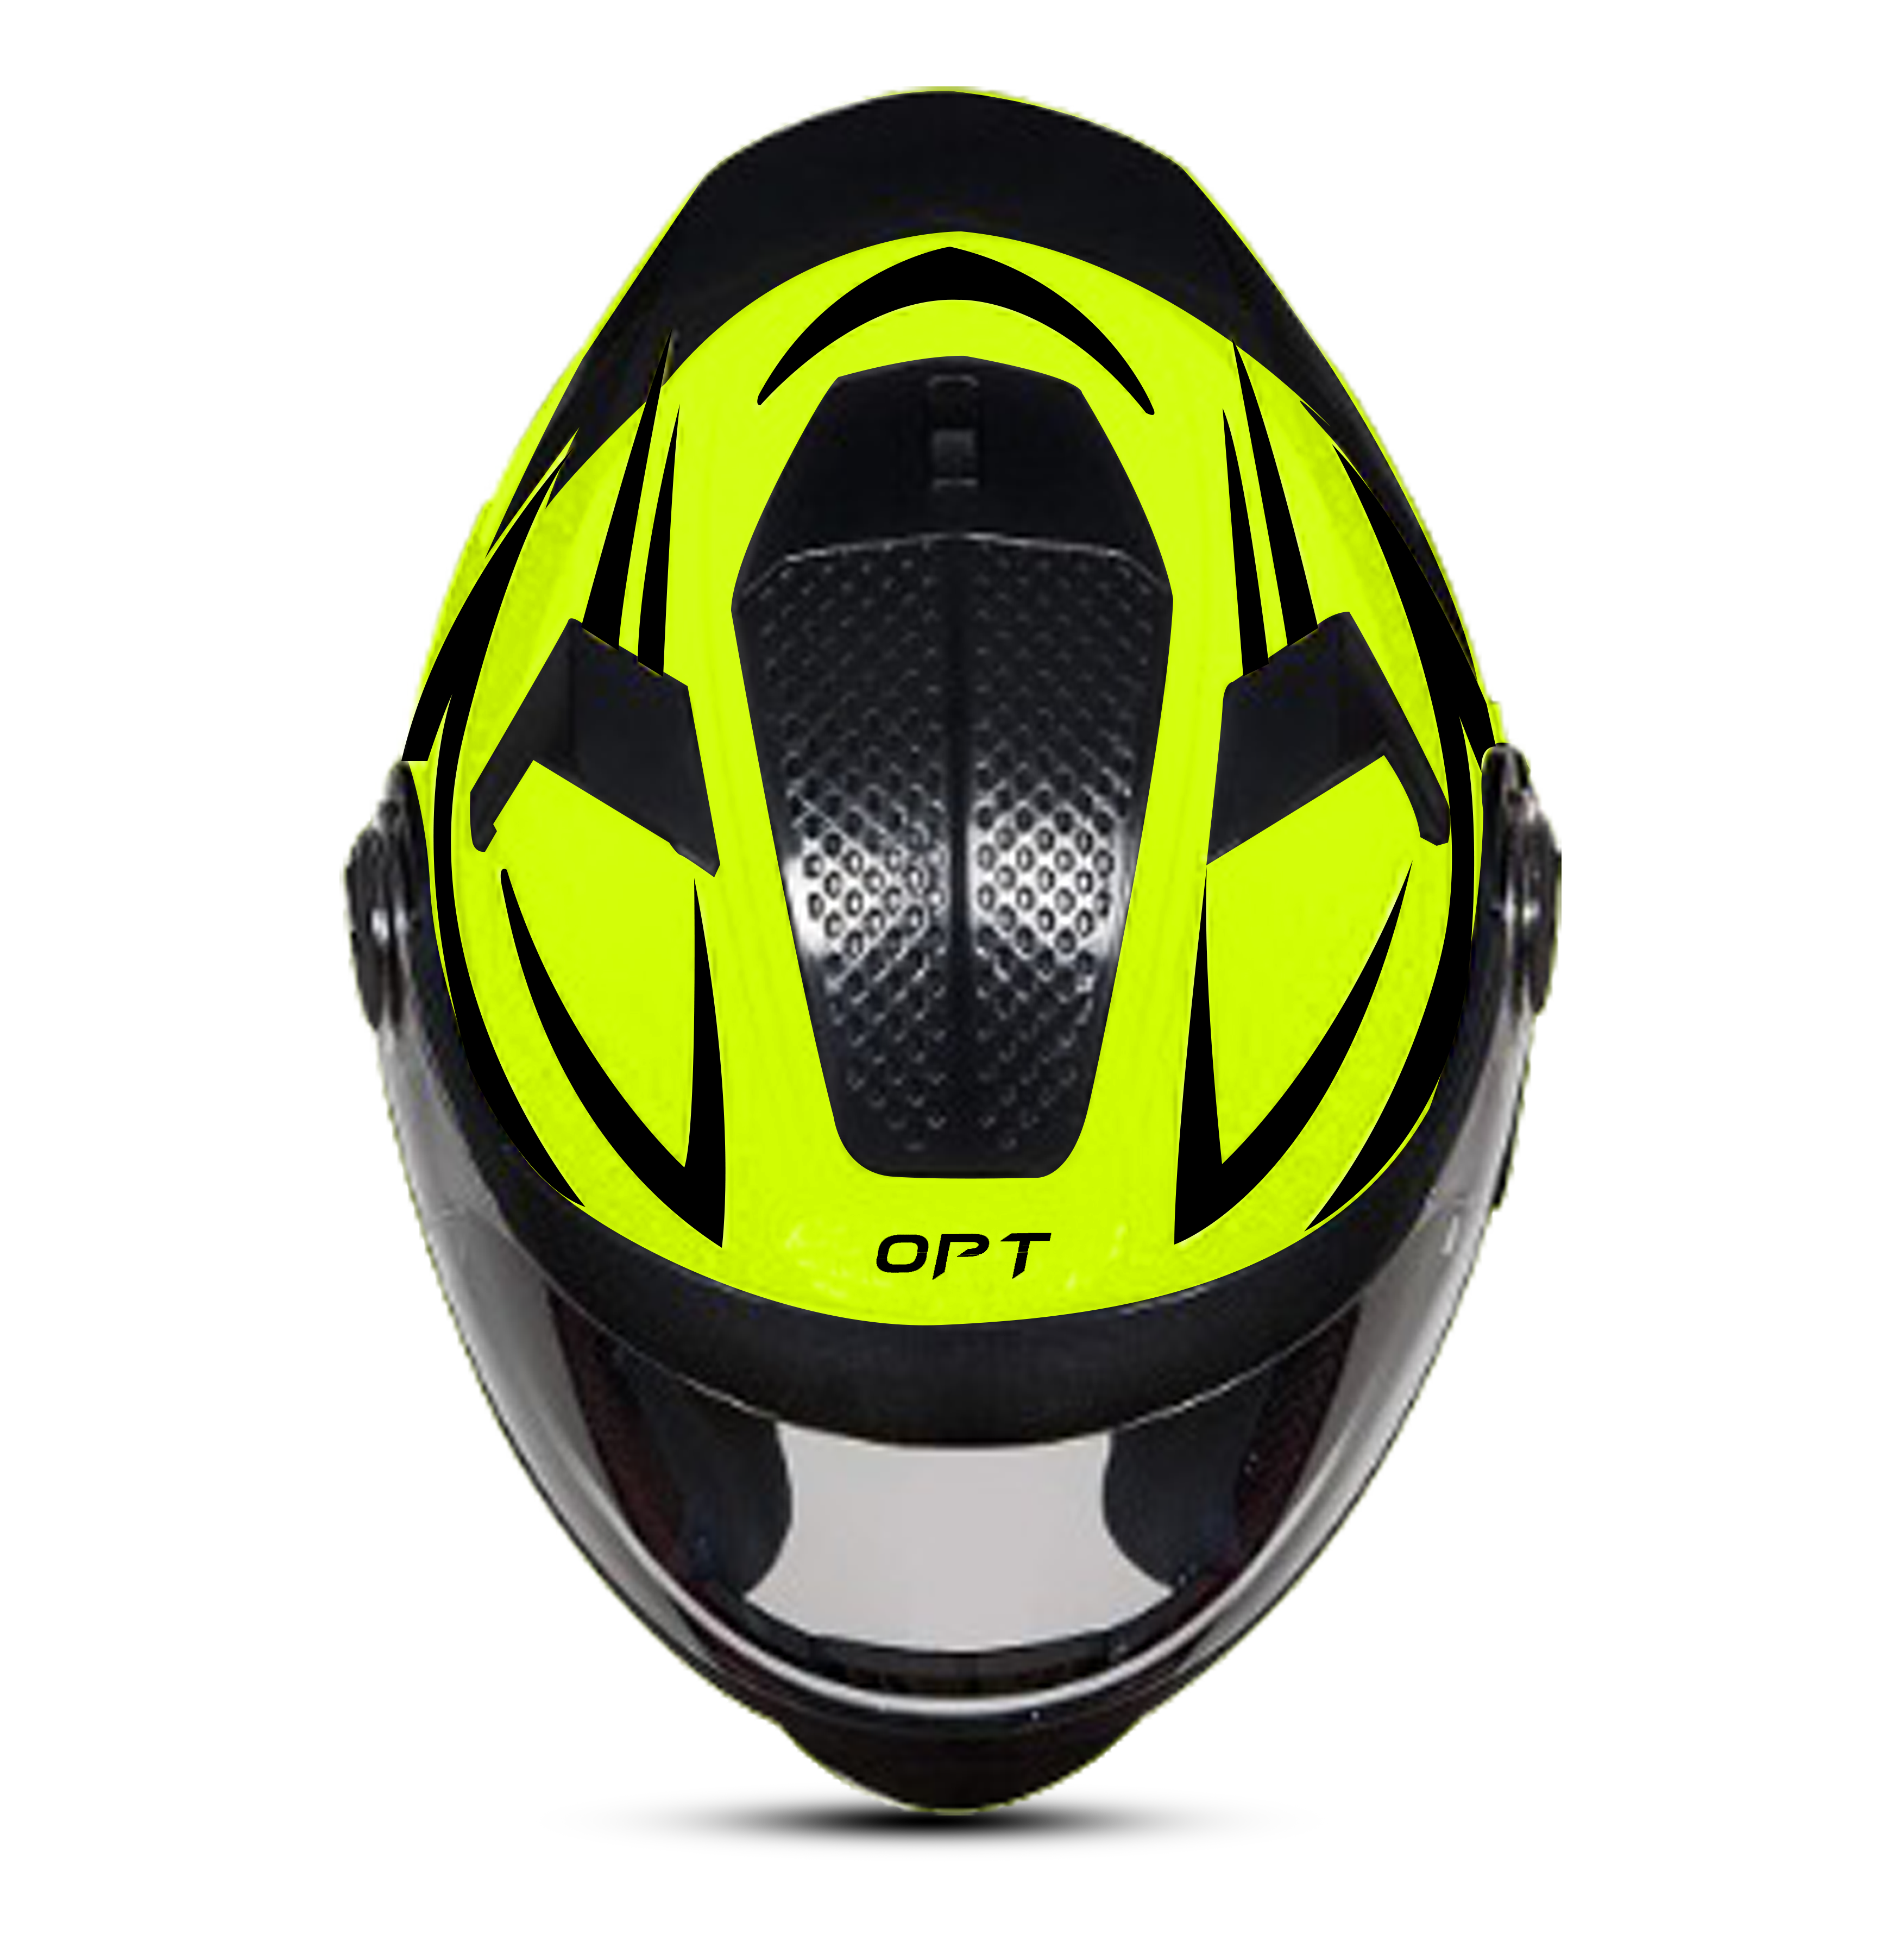 Steelbird 7Wings Robot Opt ISI Certified Full Face Helmet With Night Reflective Graphics (Glossy Fluo Neon Black With Clear Visor)